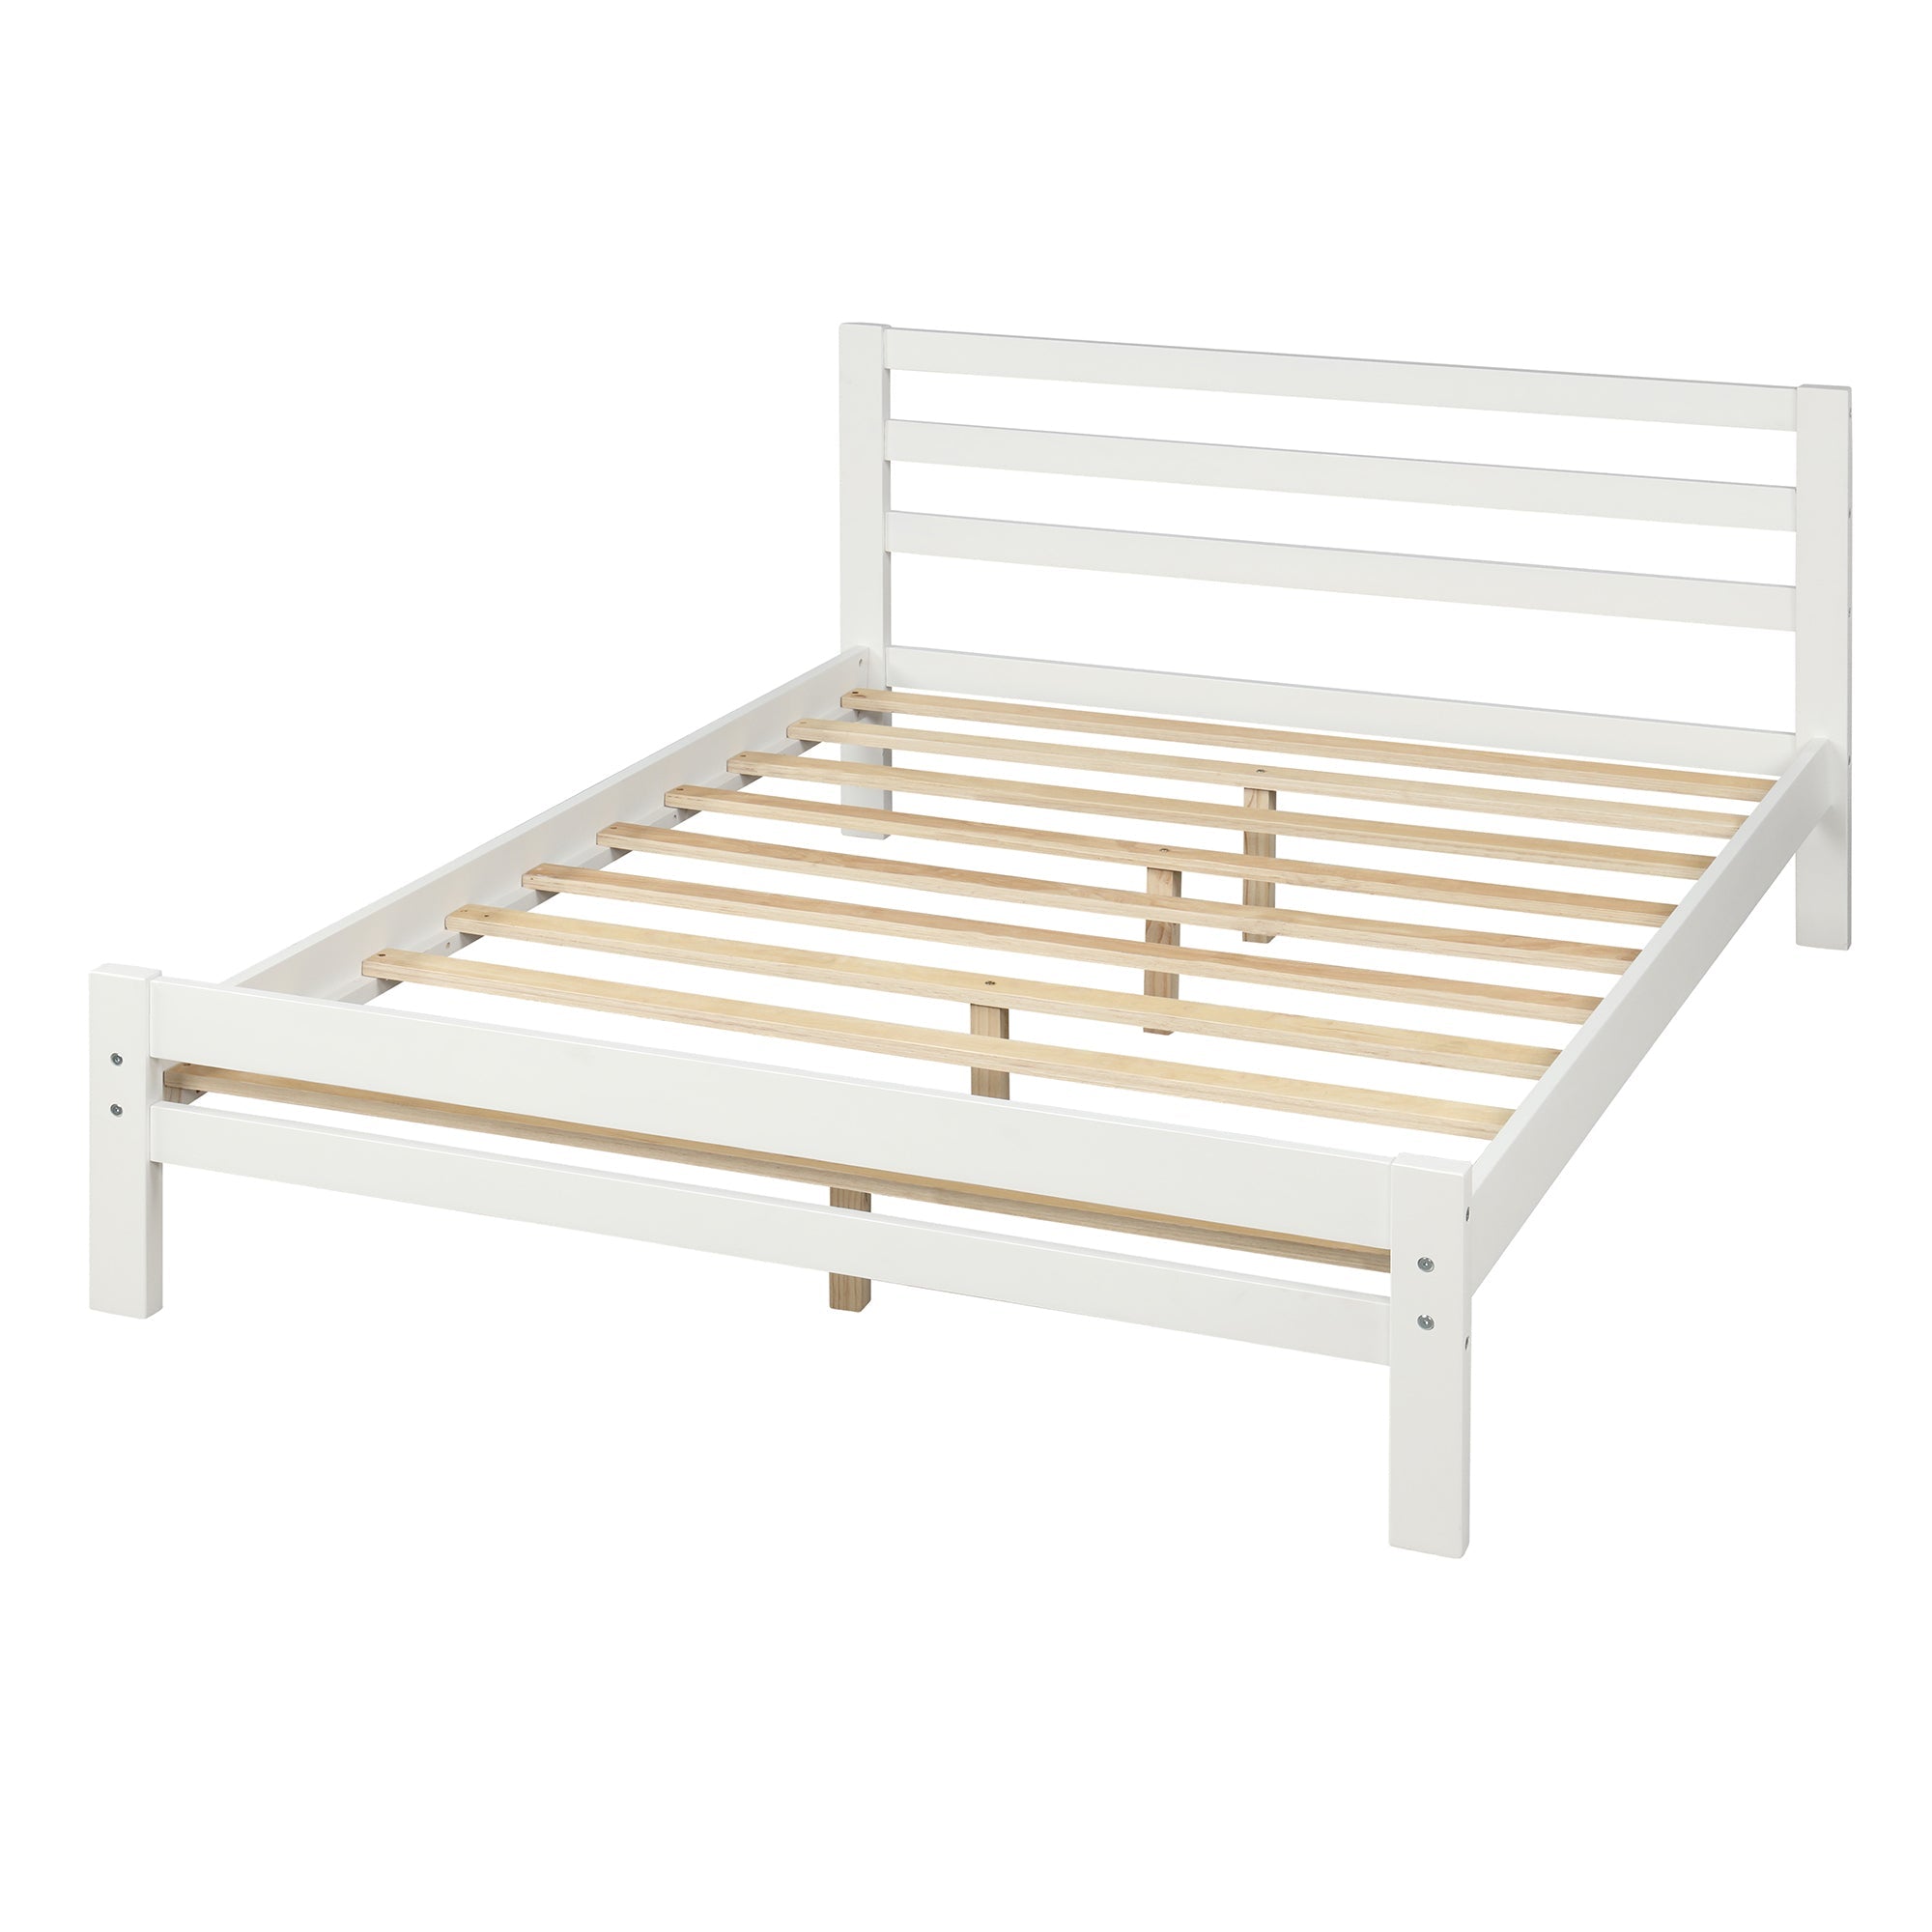 White Full Wood Platform Bed with Two Drawers - Storage Solution, Sturdy Support